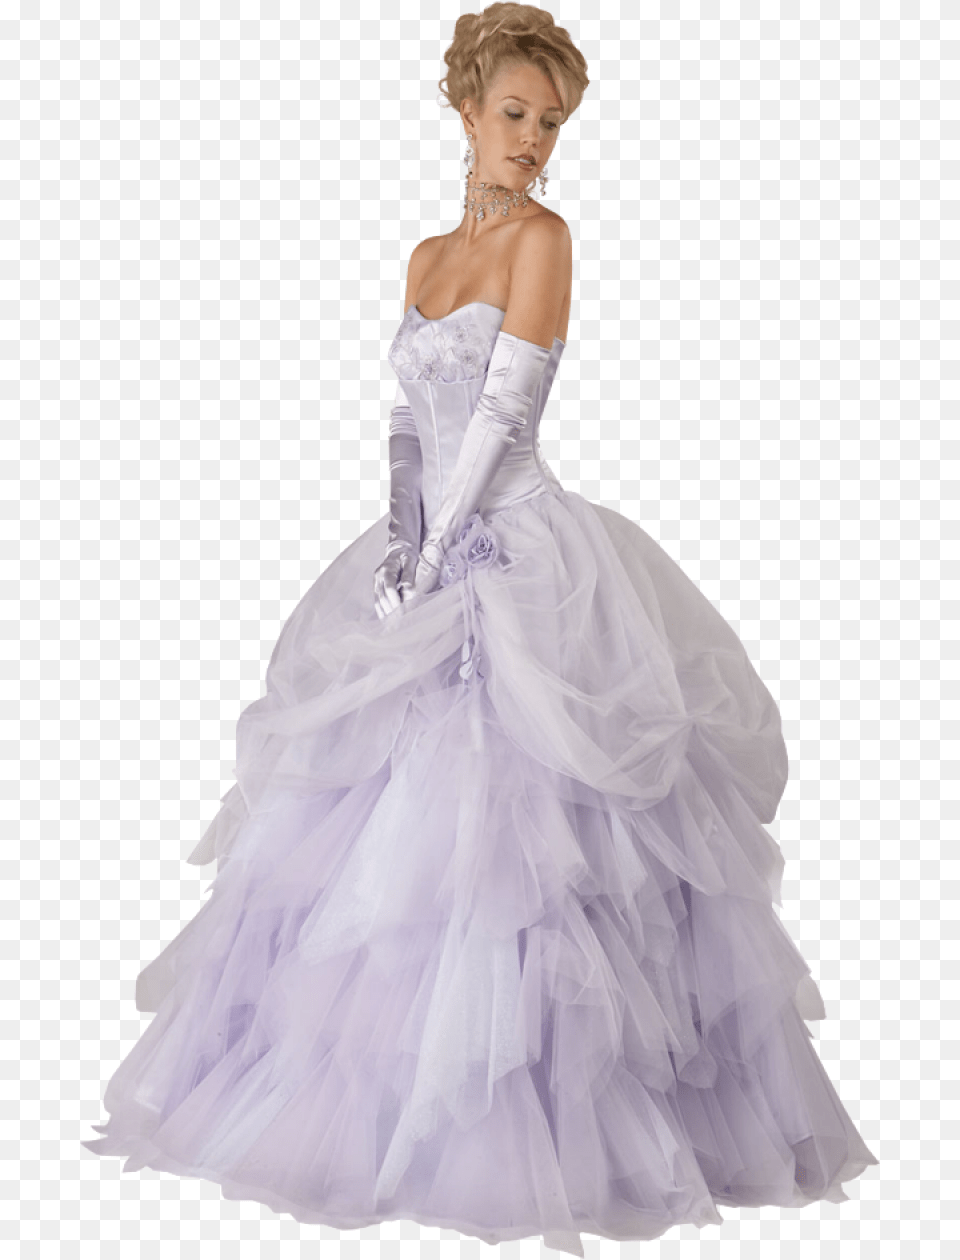 Bride In A Violet Wedding Dress Image Girl In Dress, Formal Wear, Wedding Gown, Clothing, Fashion Png